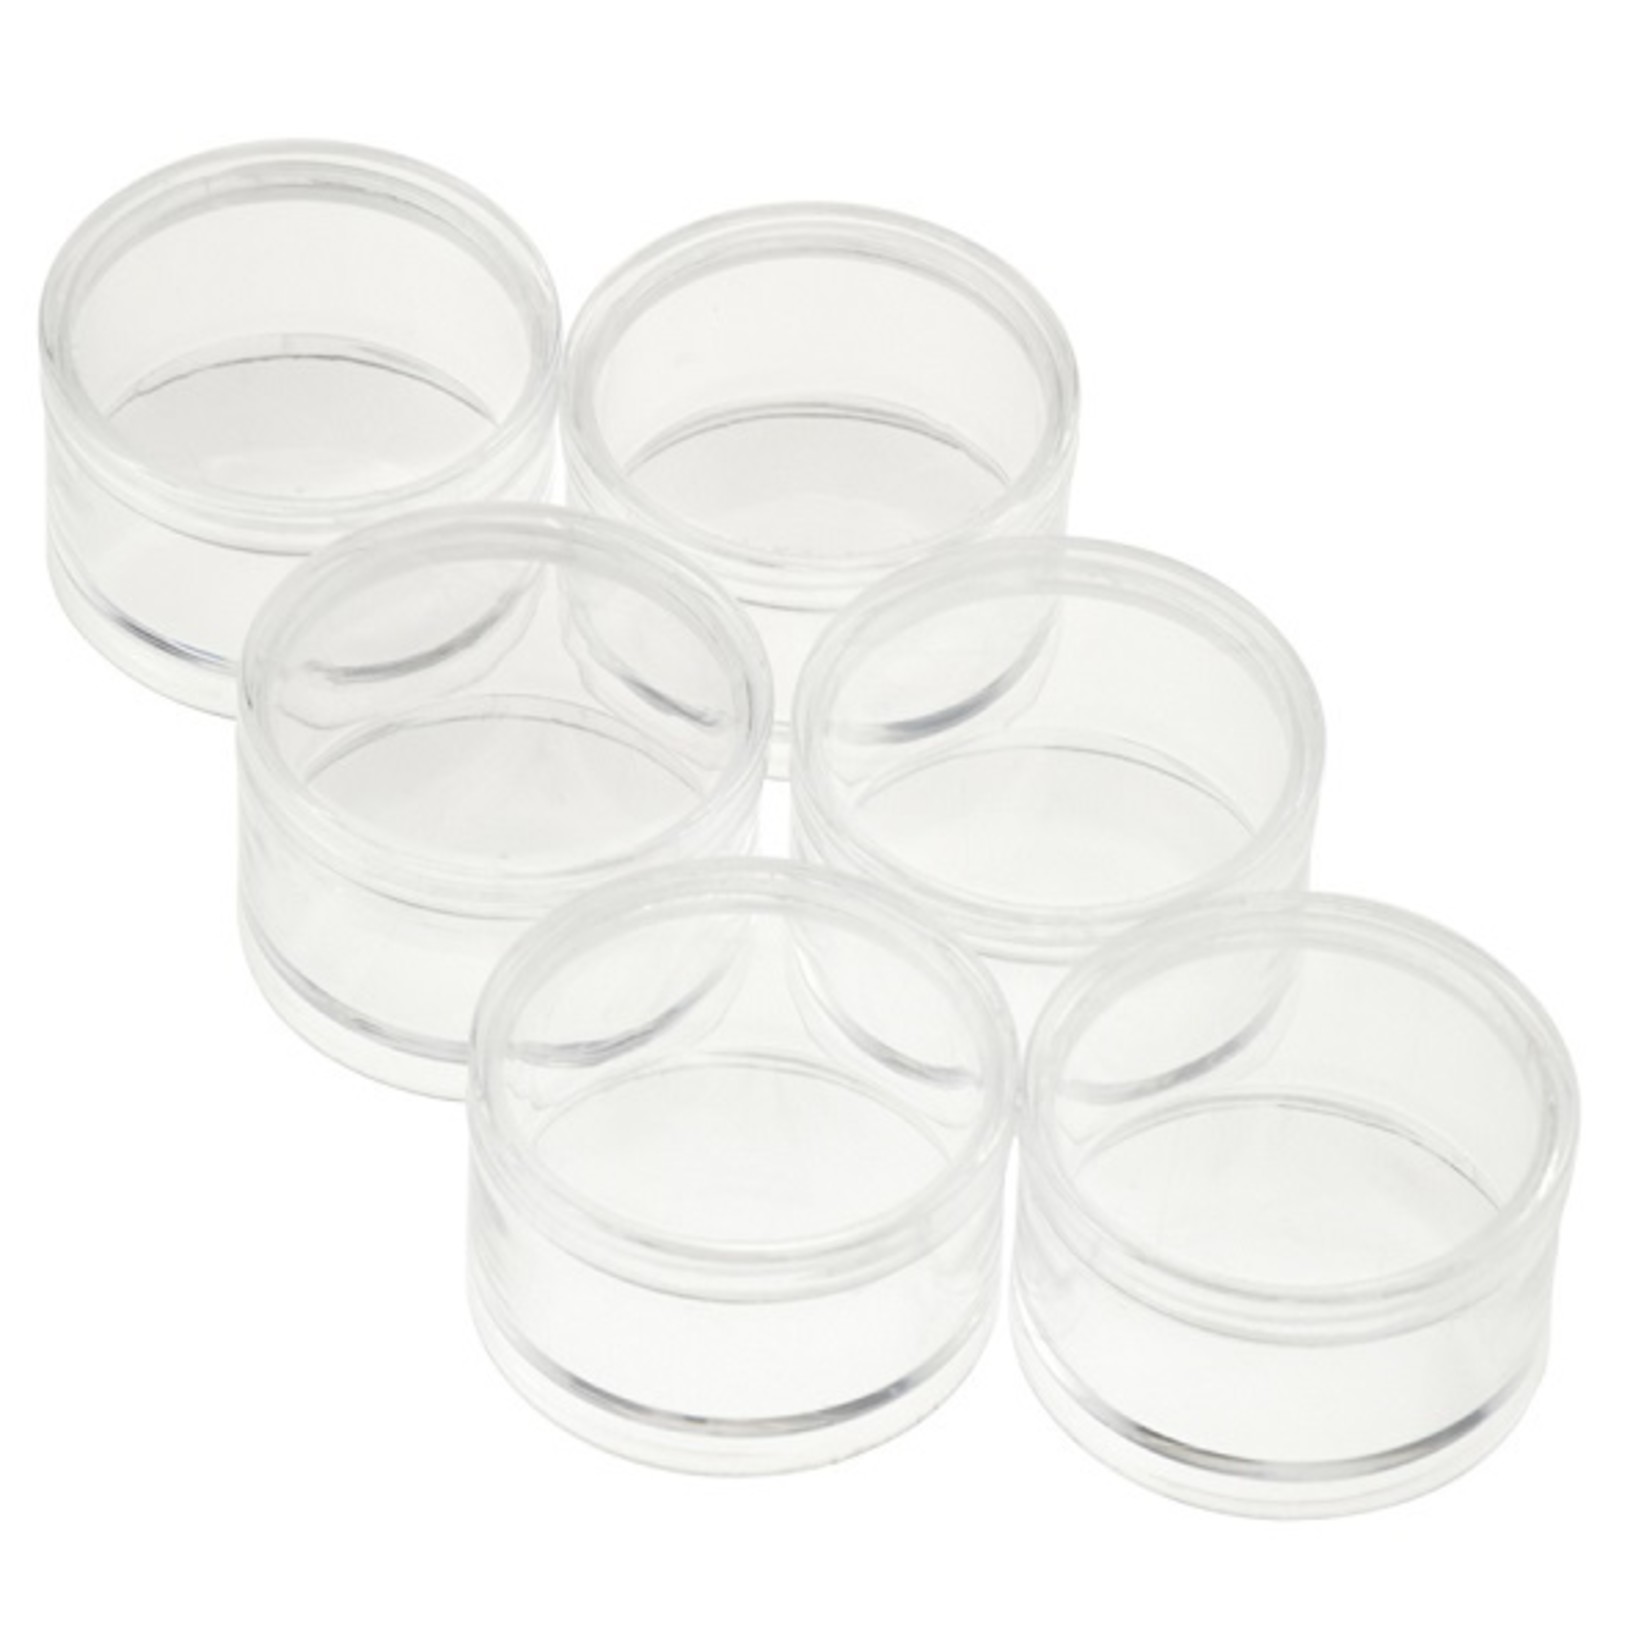 Sona SE 6 ct. Round Containers w/ Screw-On Lid - 2" x 1 1/4"